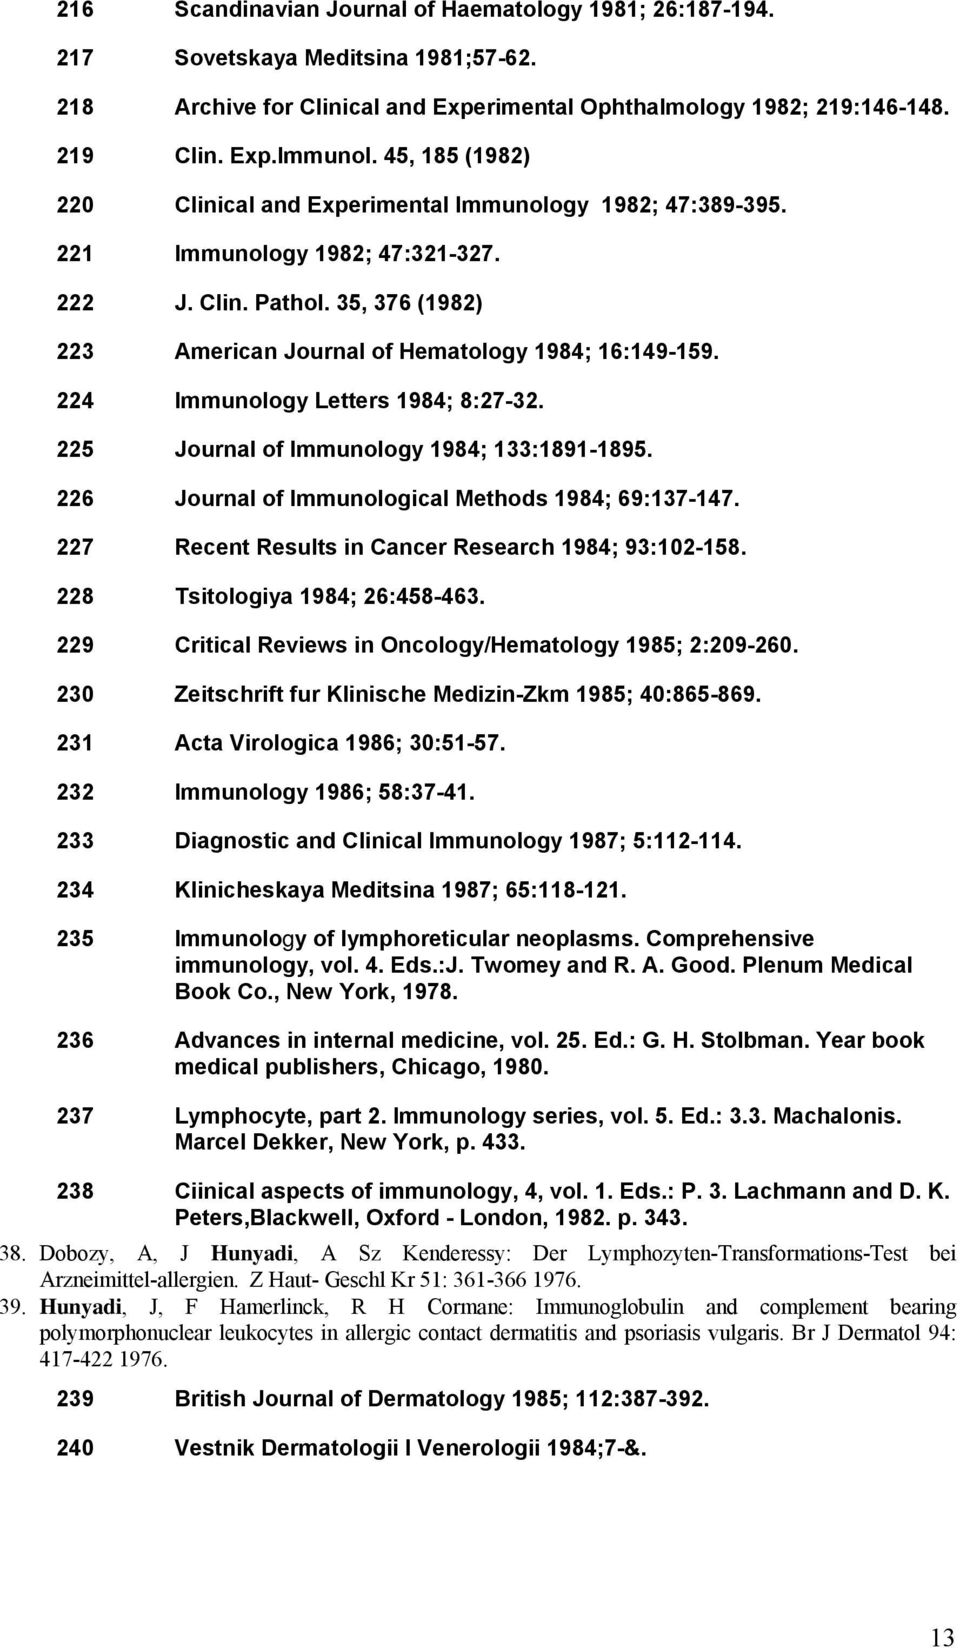 224 Immunology Letters 1984; 8:27-32. 225 Journal of Immunology 1984; 133:1891-1895. 226 Journal of Immunological Methods 1984; 69:137-147. 227 Recent Results in Cancer Research 1984; 93:102-158.